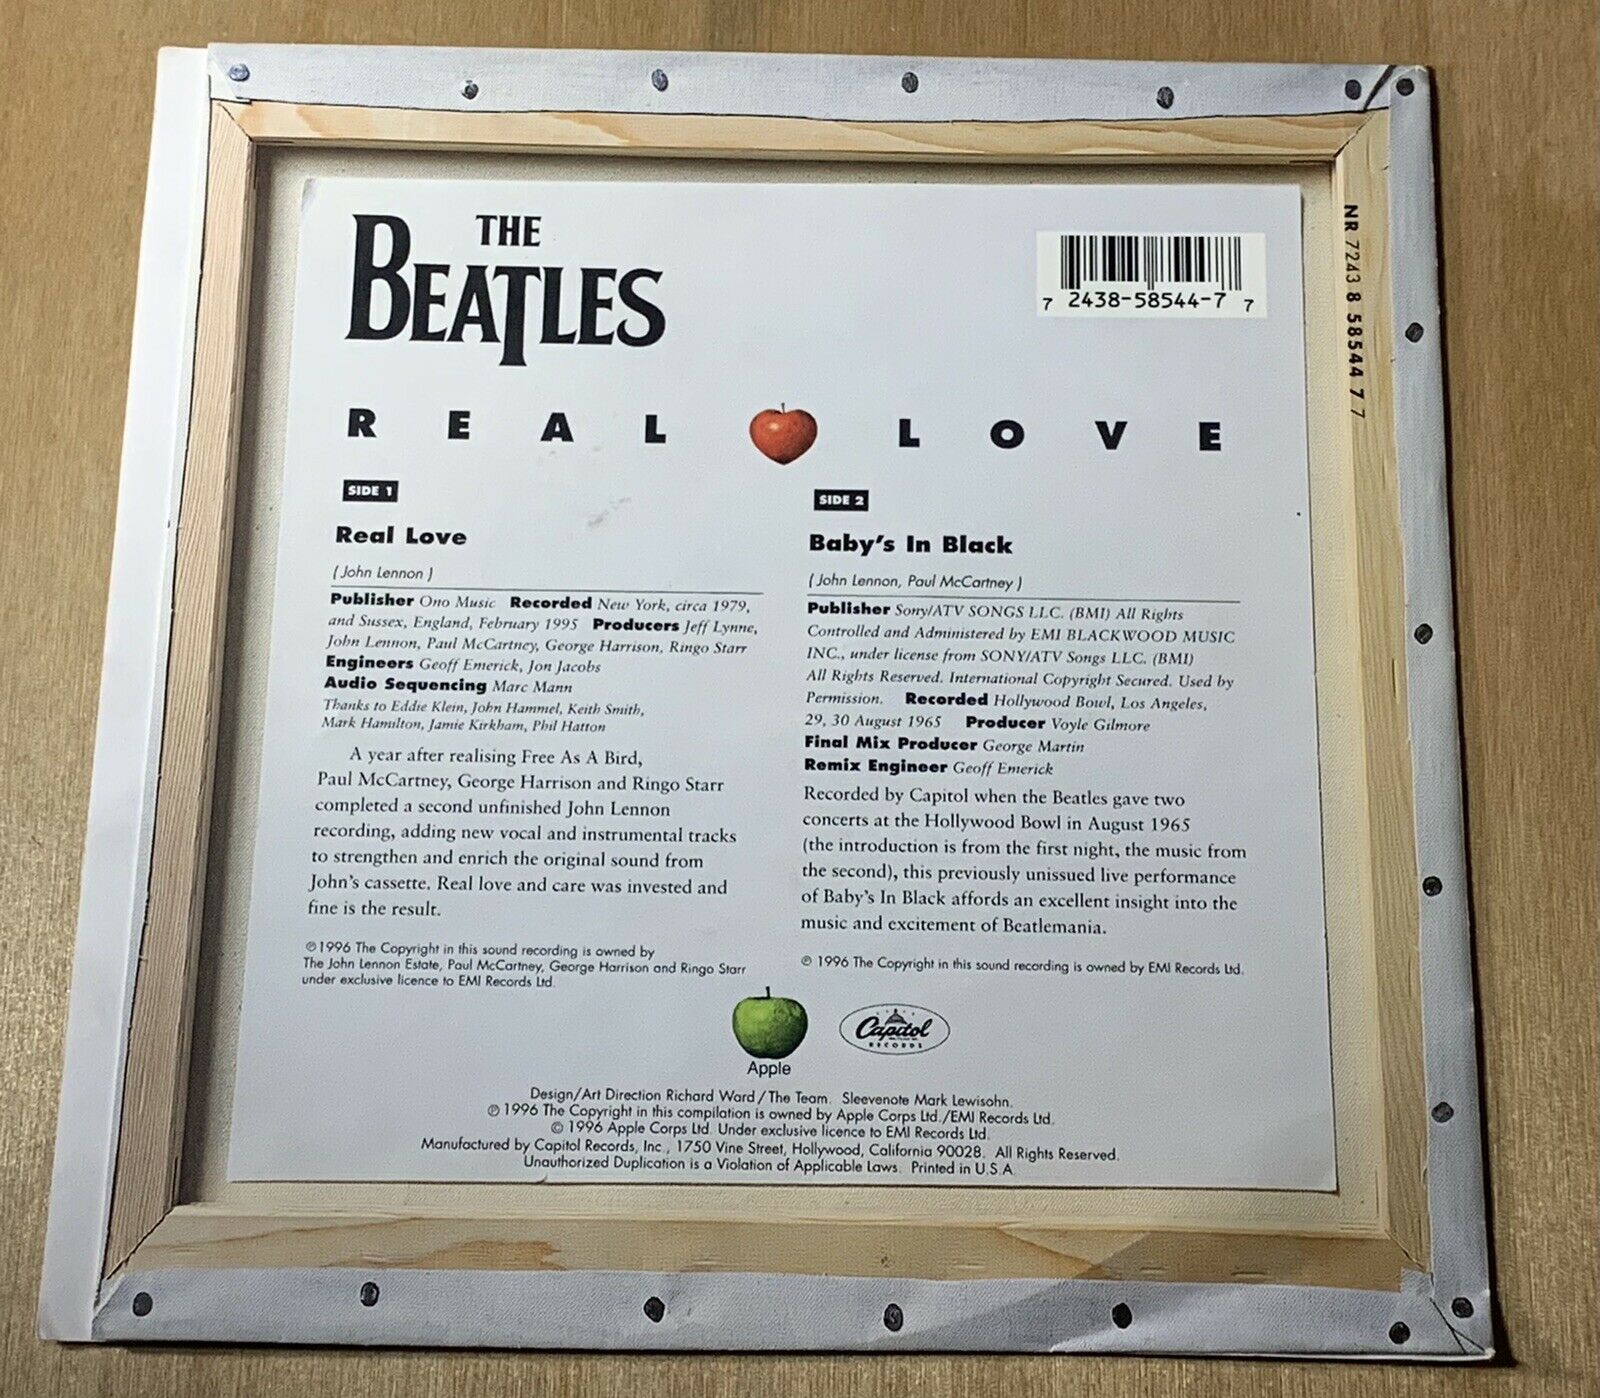 Pic 1 Jeff Lynne signed Real Love 7 inch vinyl record The Beatles proof